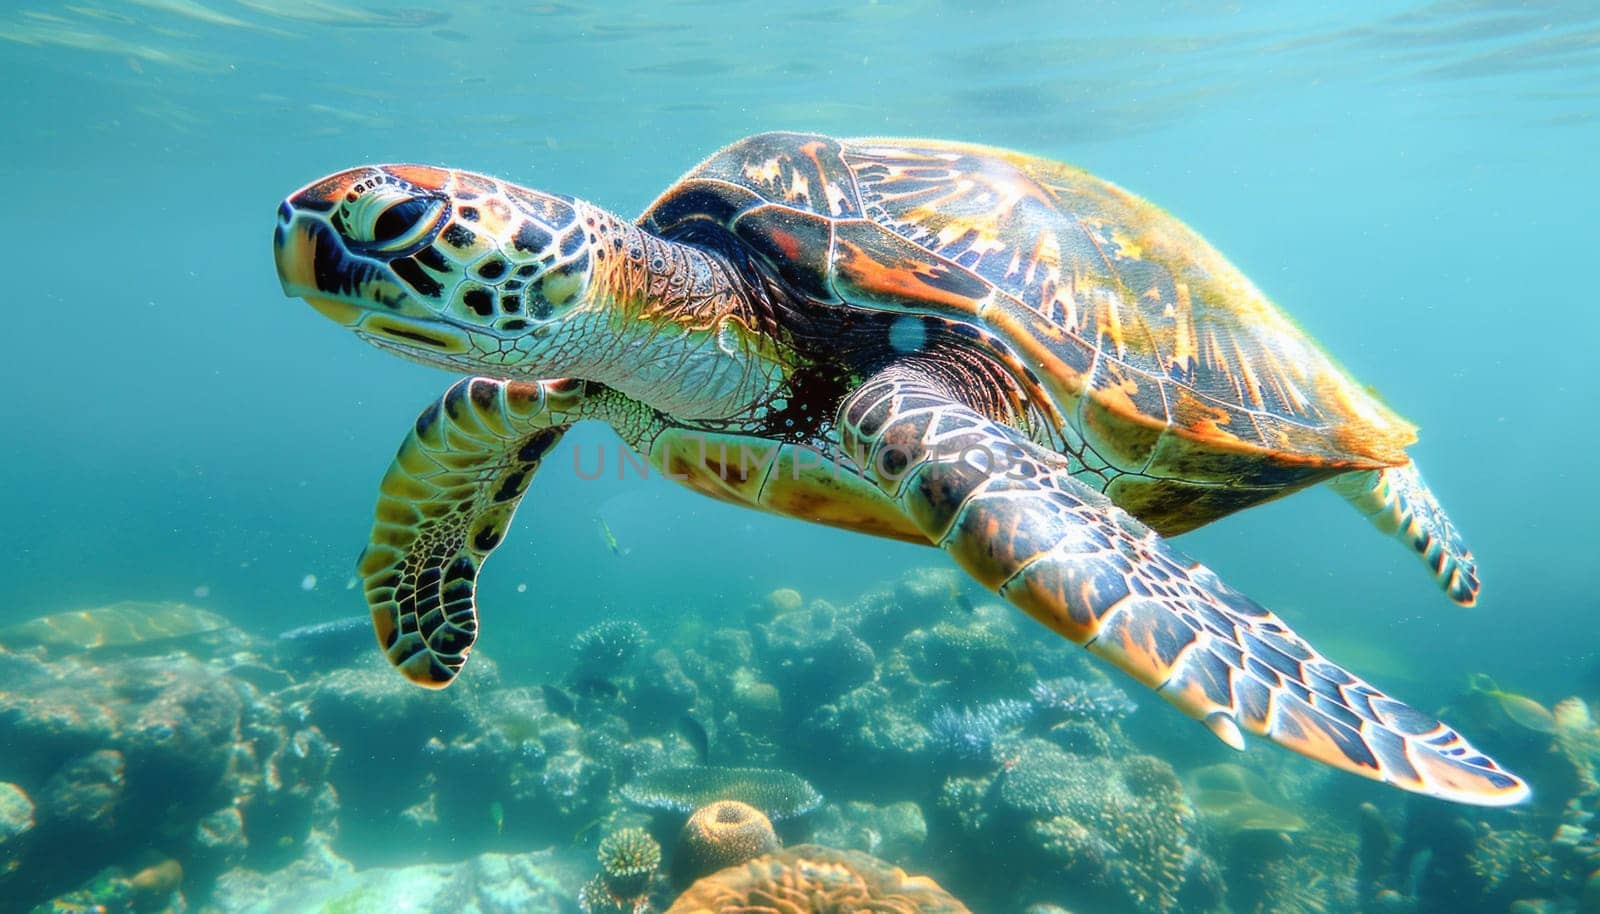 A sea turtle gracefully swims through the ocean waters near a colorful coral reef in this marine scene